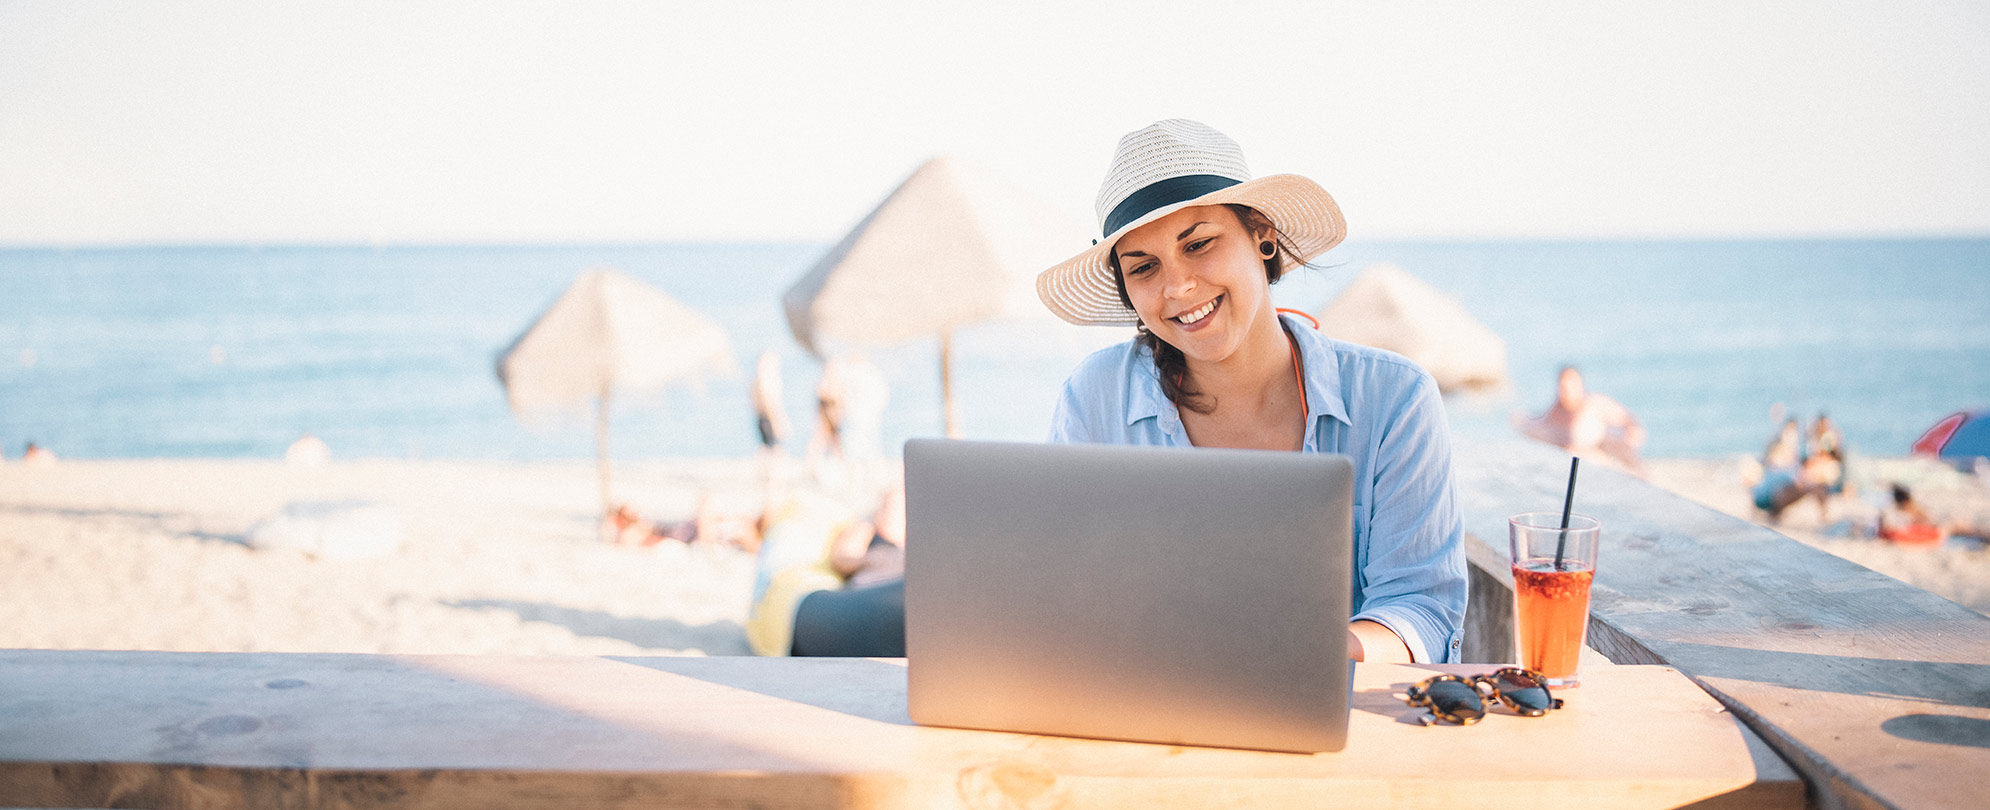 A smiling woman working remotely from a outdoor bar with the beach in the background.